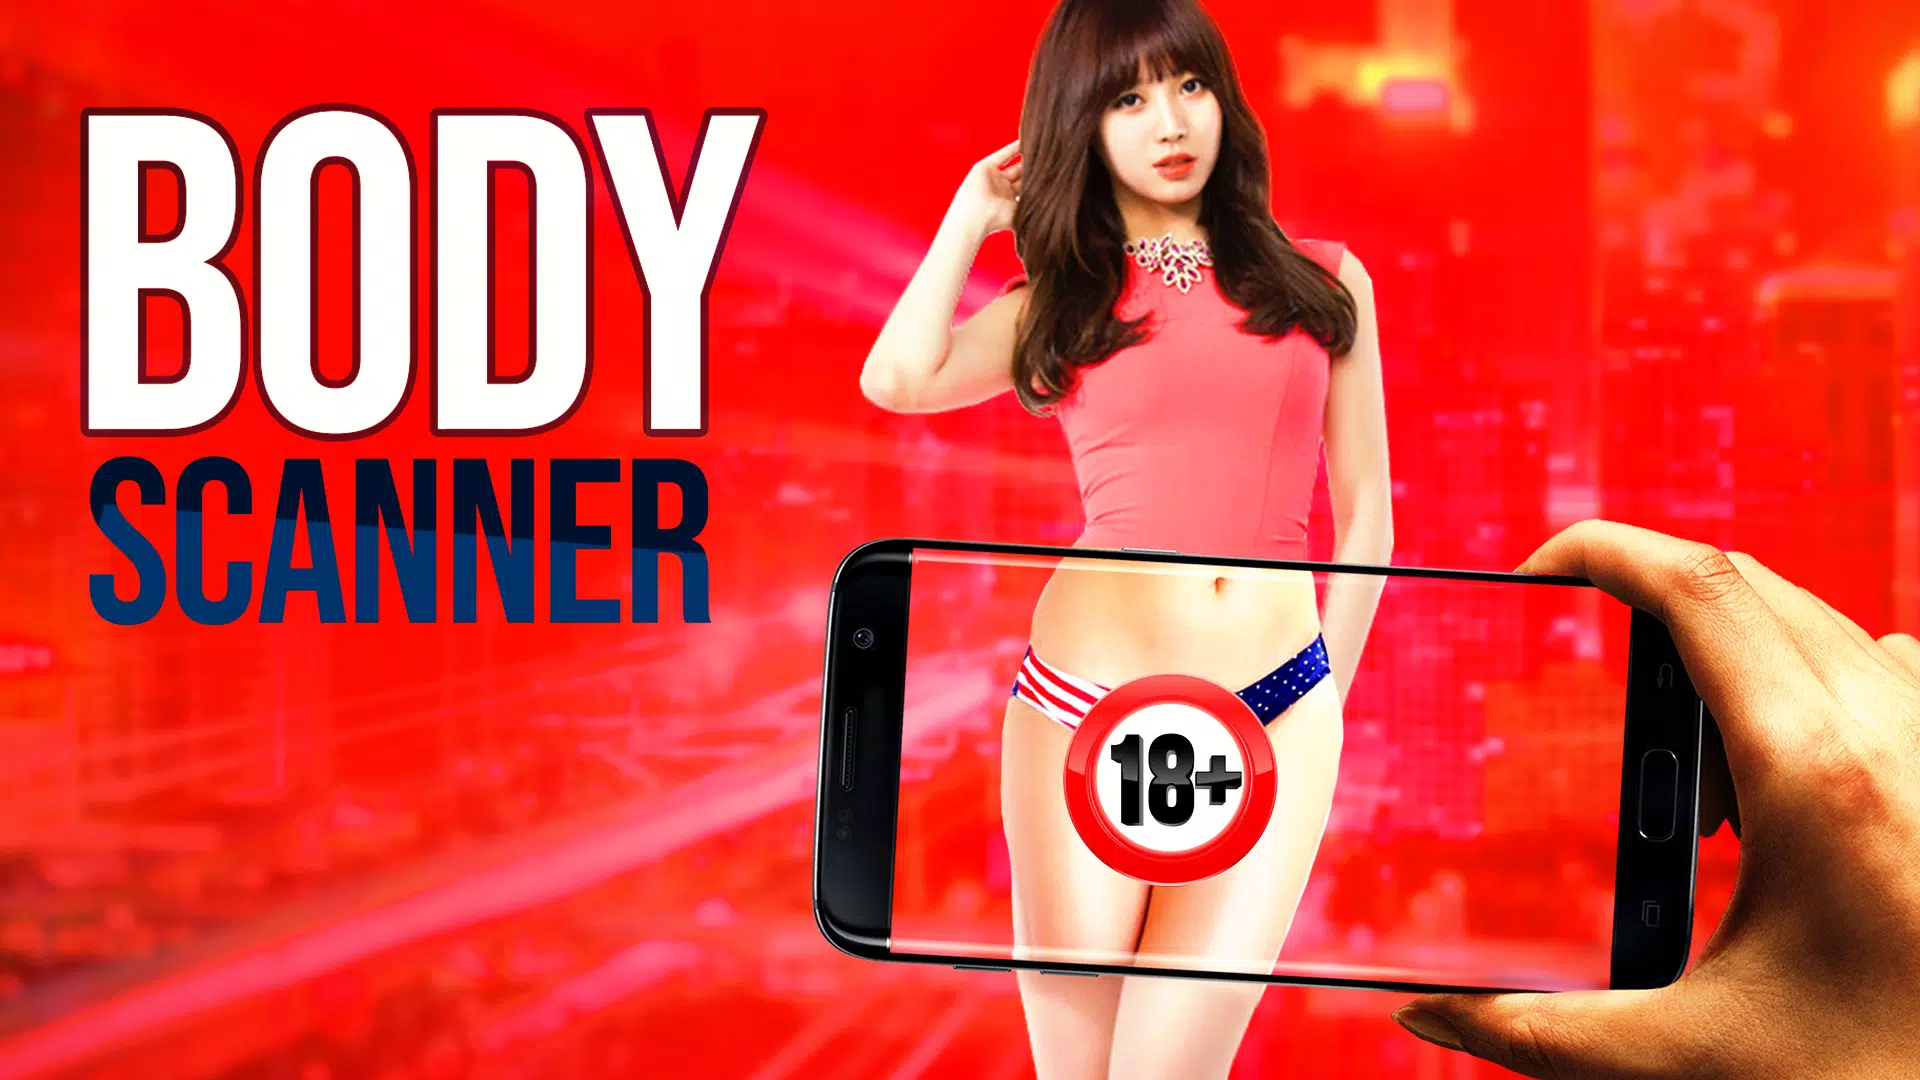 Naked body scanner for adults prank! APK pour Android Télécharger